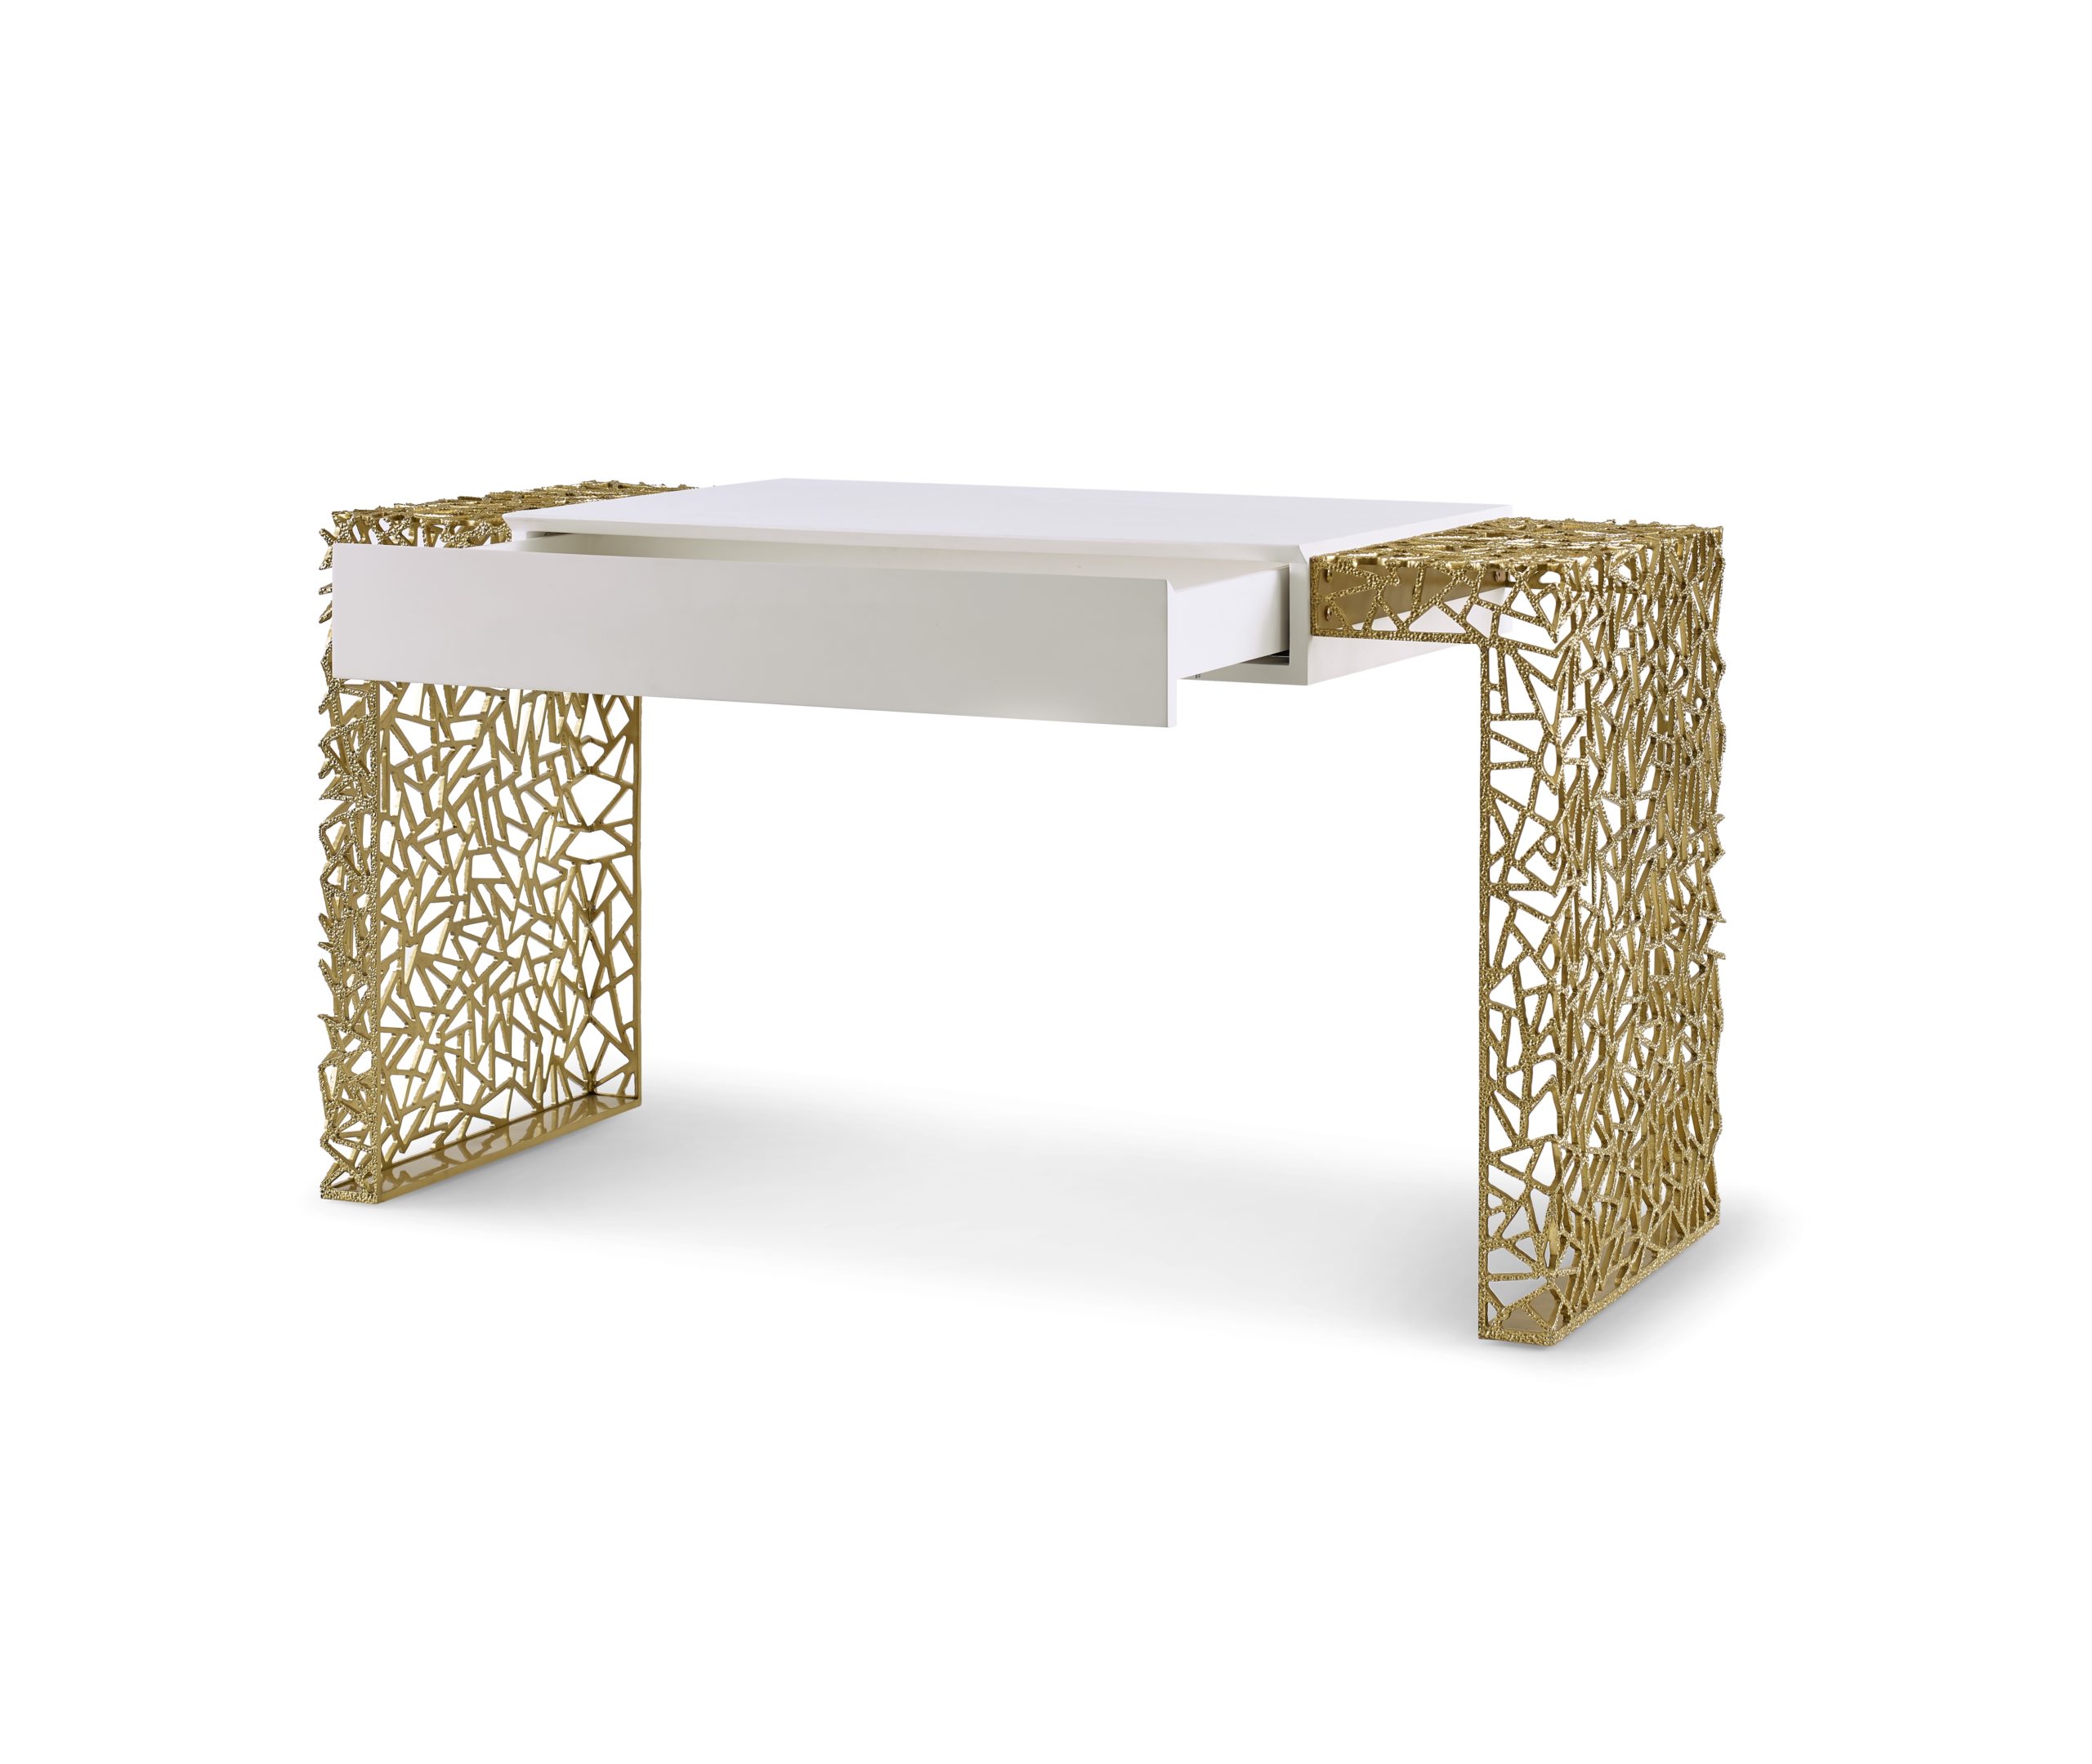 Baker_products_WNWN_fractal_desk_BAA3265_OPEN-scaled-1